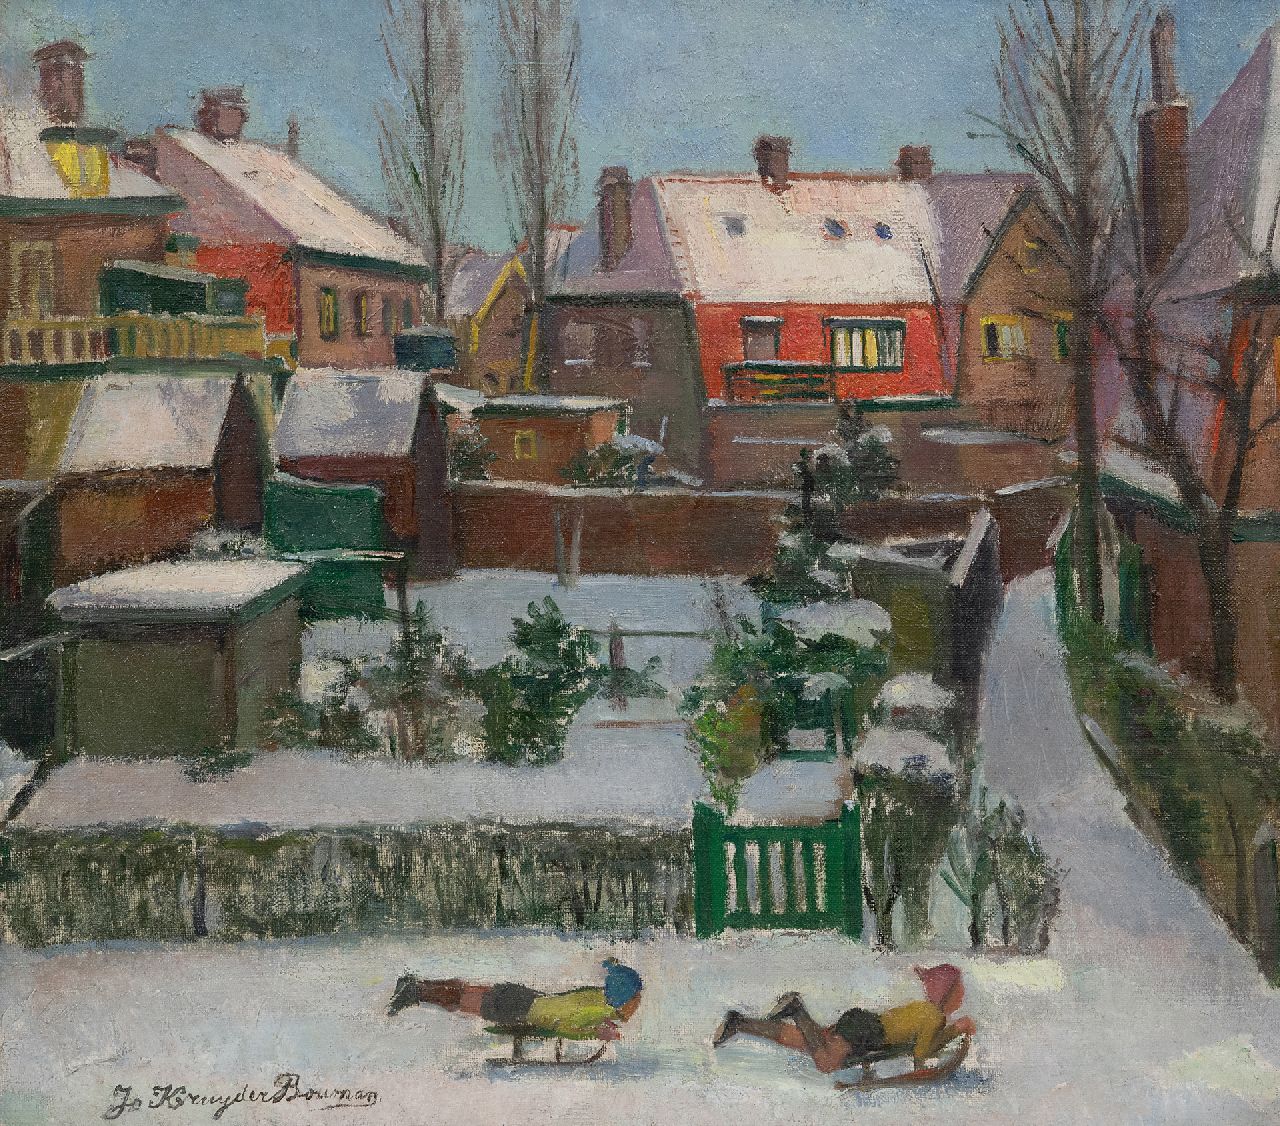 Kruyder-Bouman J.L.  | Johanna Laura 'Jo' Kruyder-Bouman | Paintings offered for sale | Sledding through town, oil on canvas 40.3 x 45.0 cm, signed l.l. and dated 1942